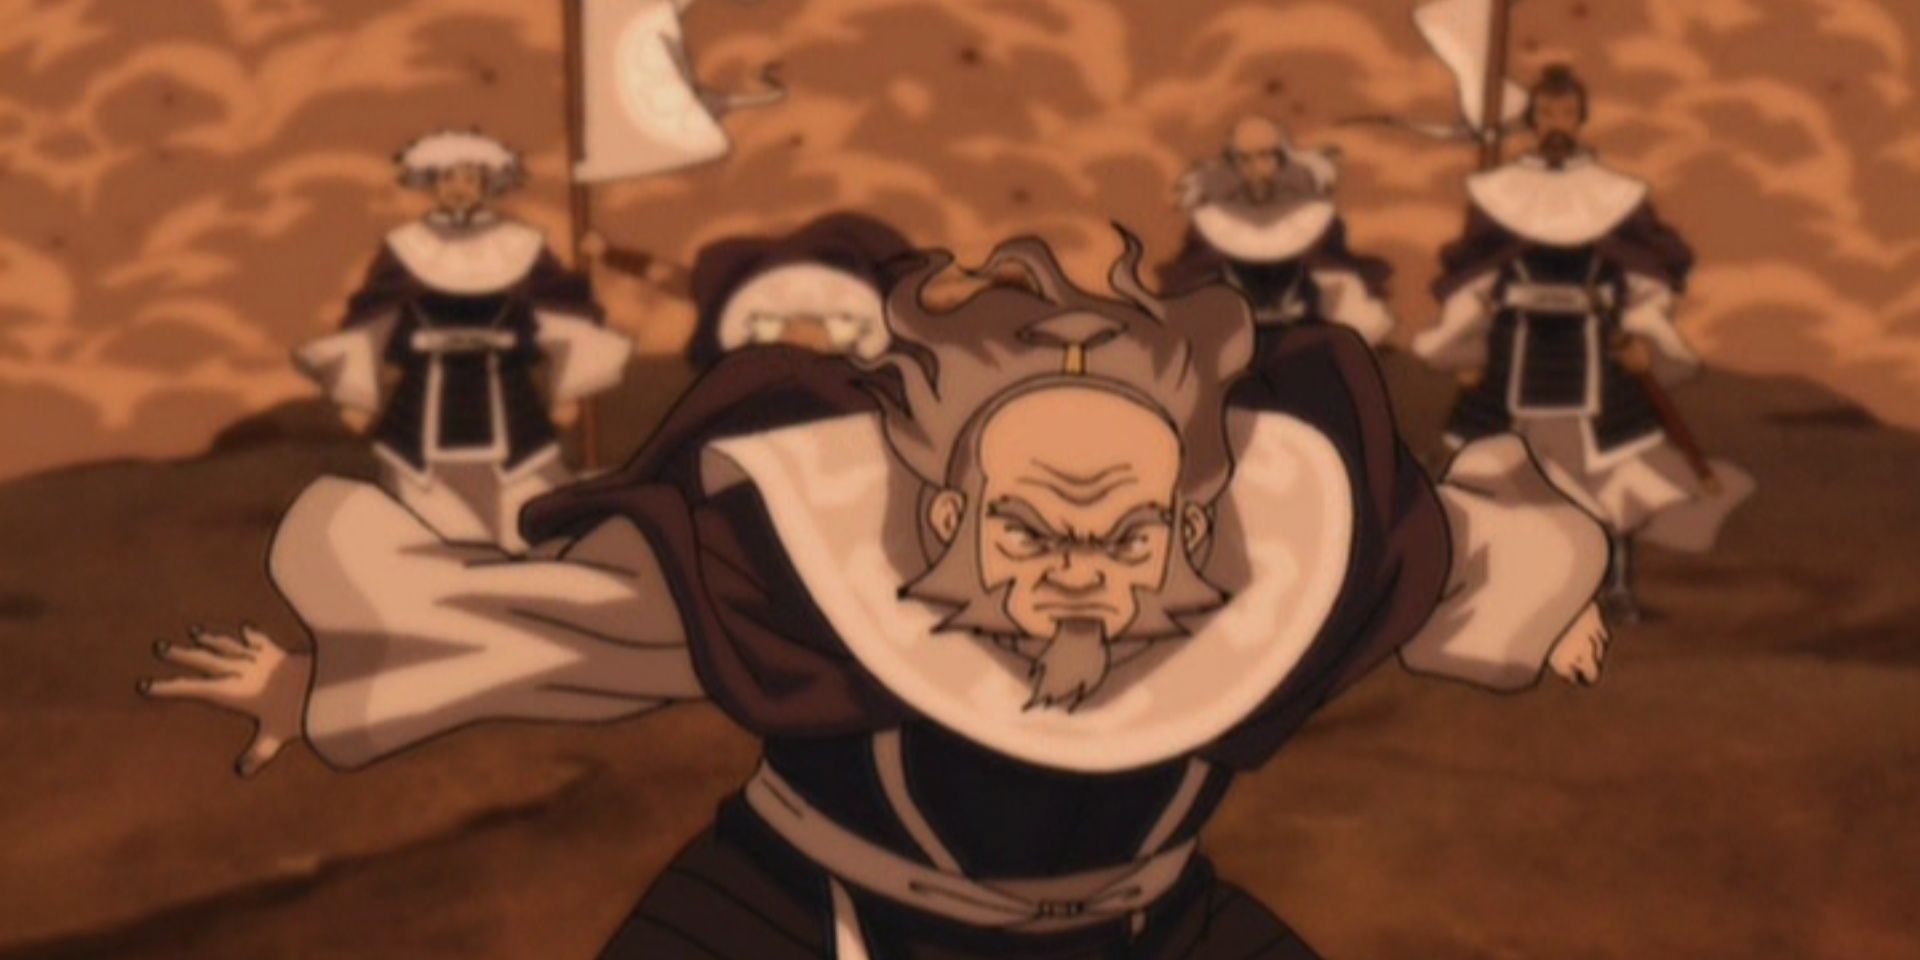 Iroh stands ahead of his allies amongst smoke in The Last Airbender